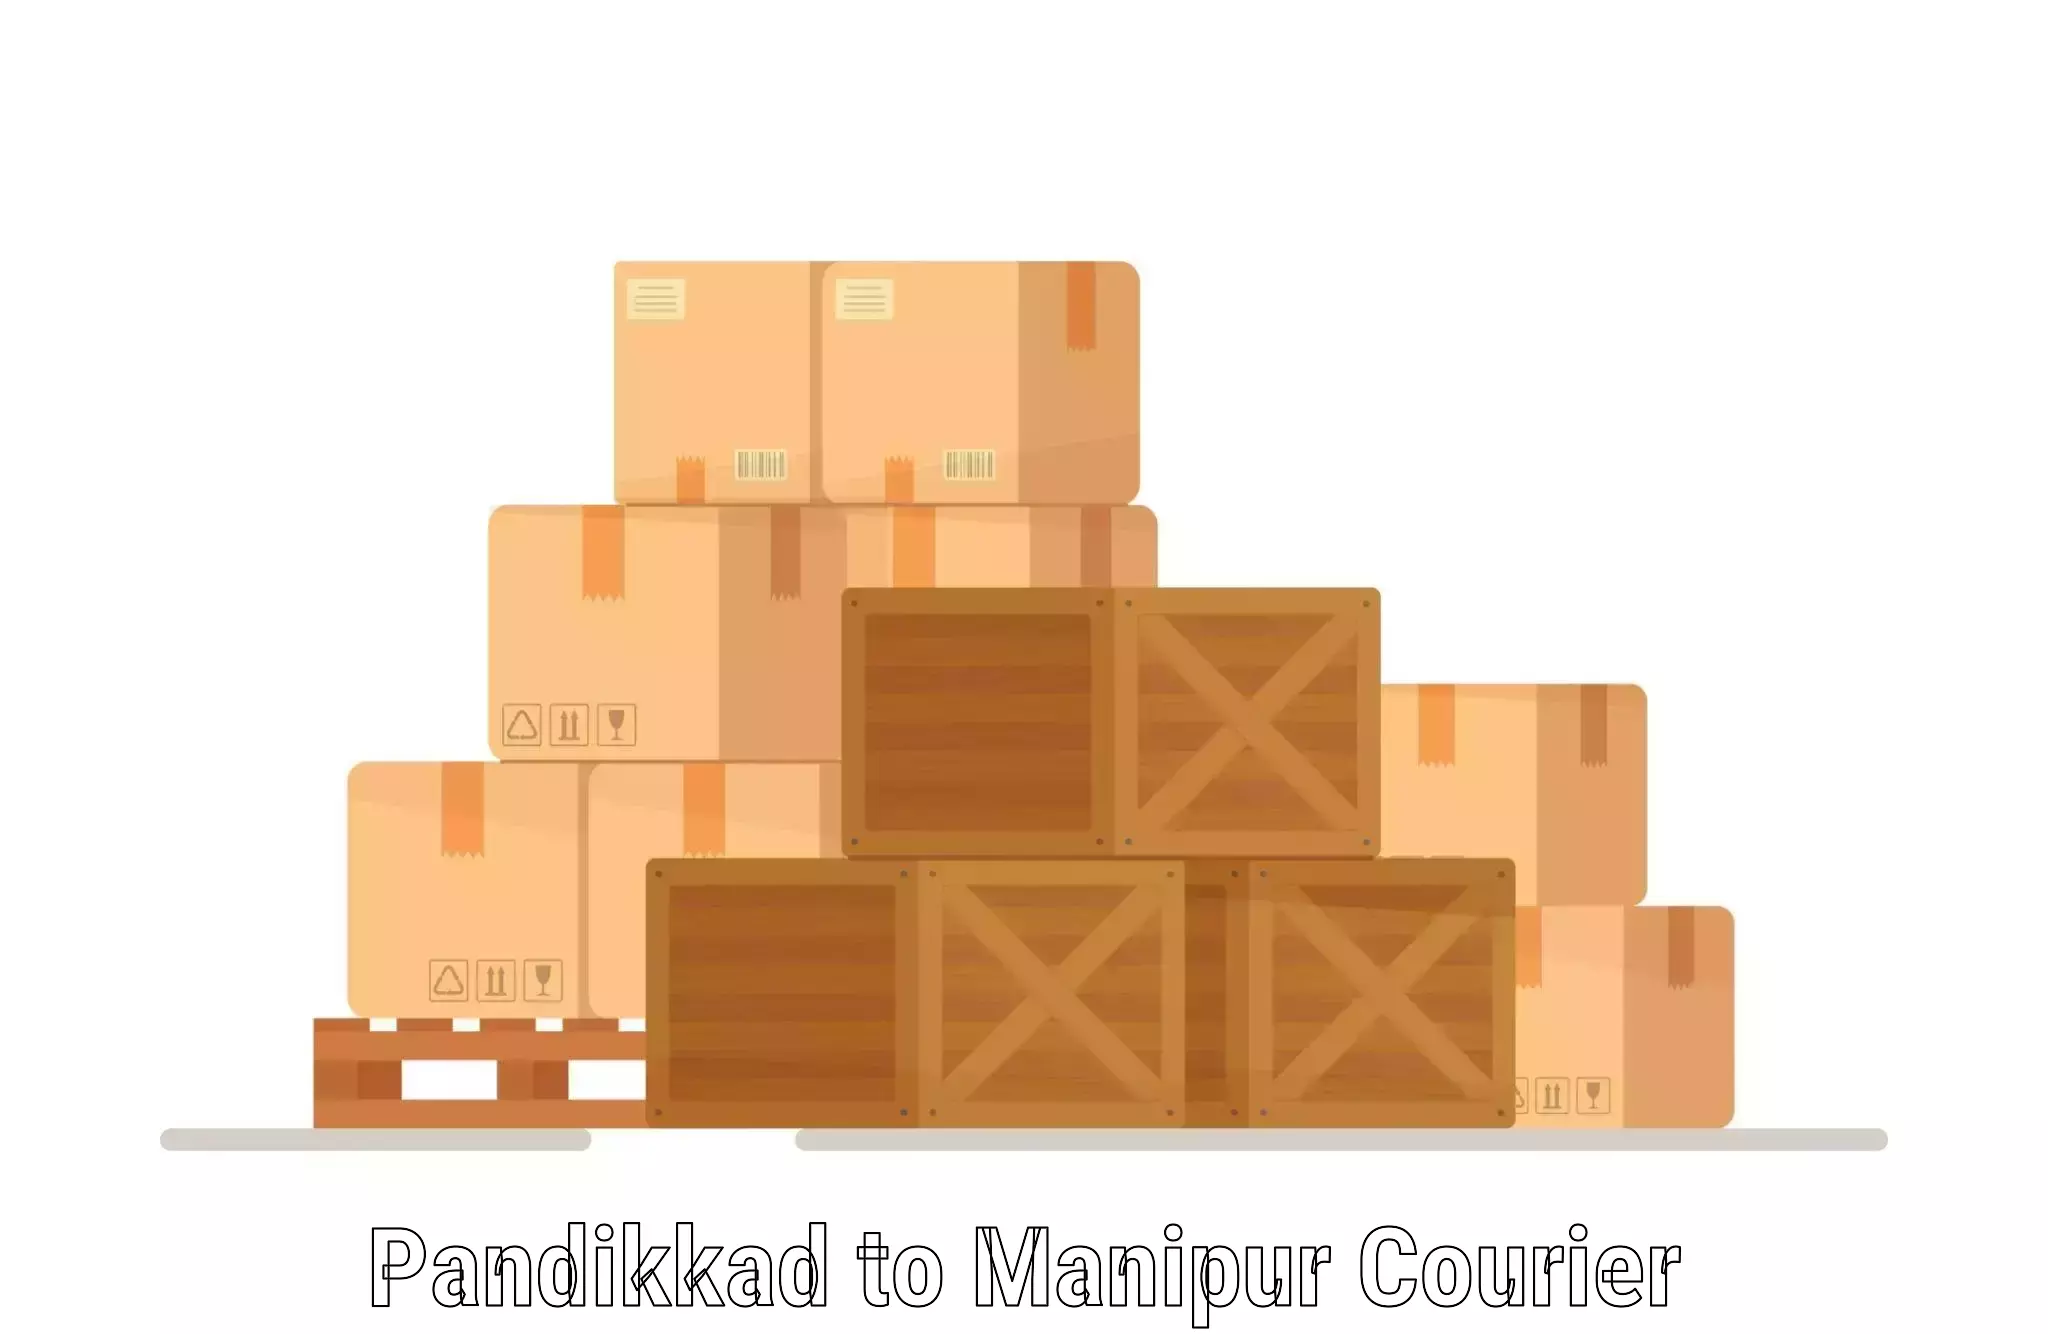 Full-service courier options Pandikkad to Manipur